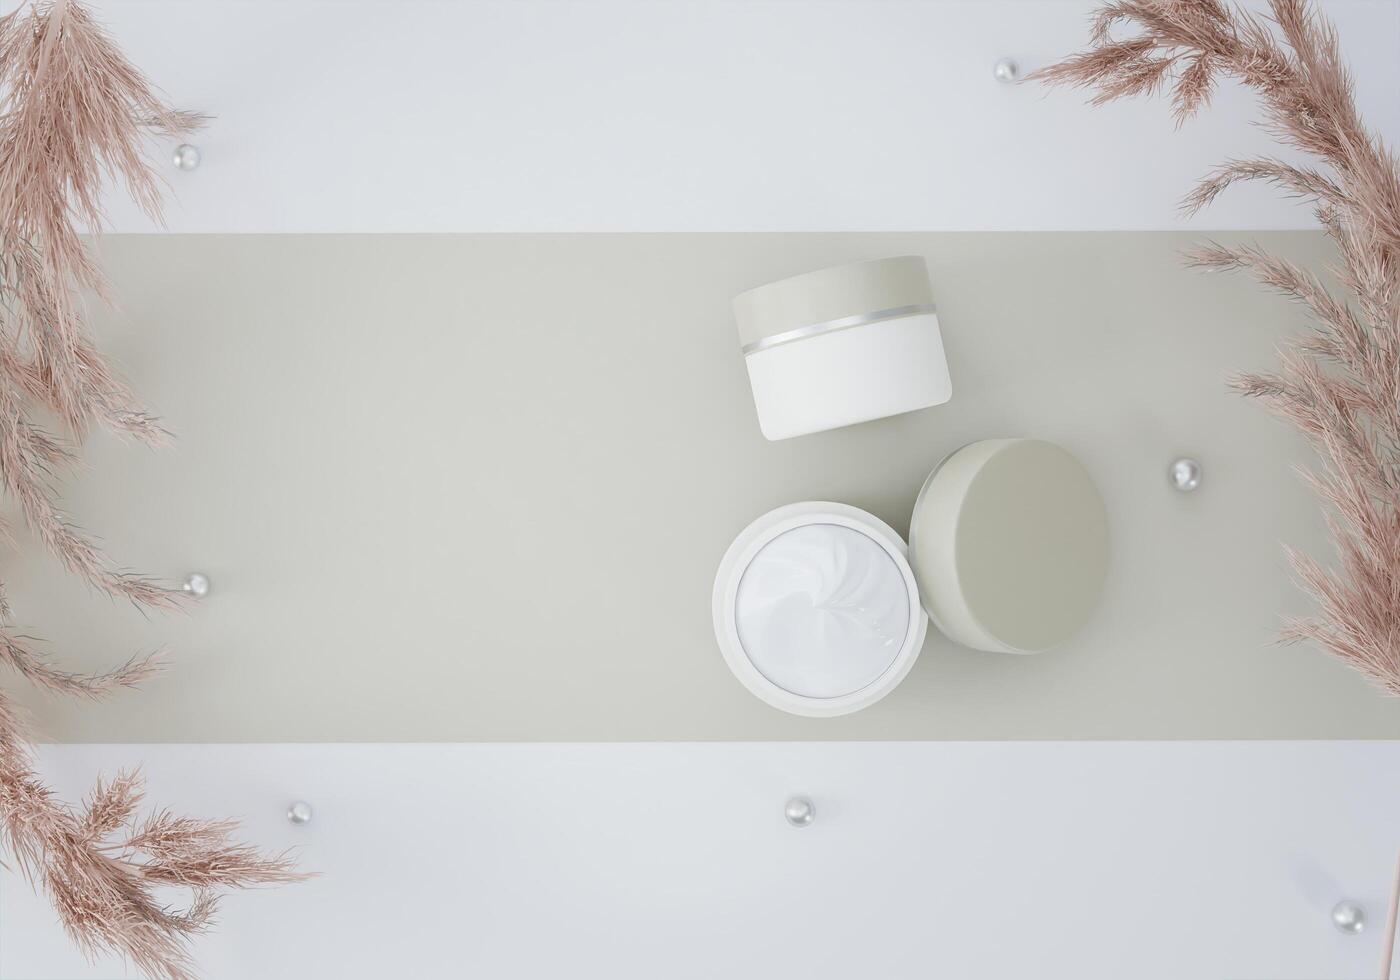 A white cream jar placed on a white background photo